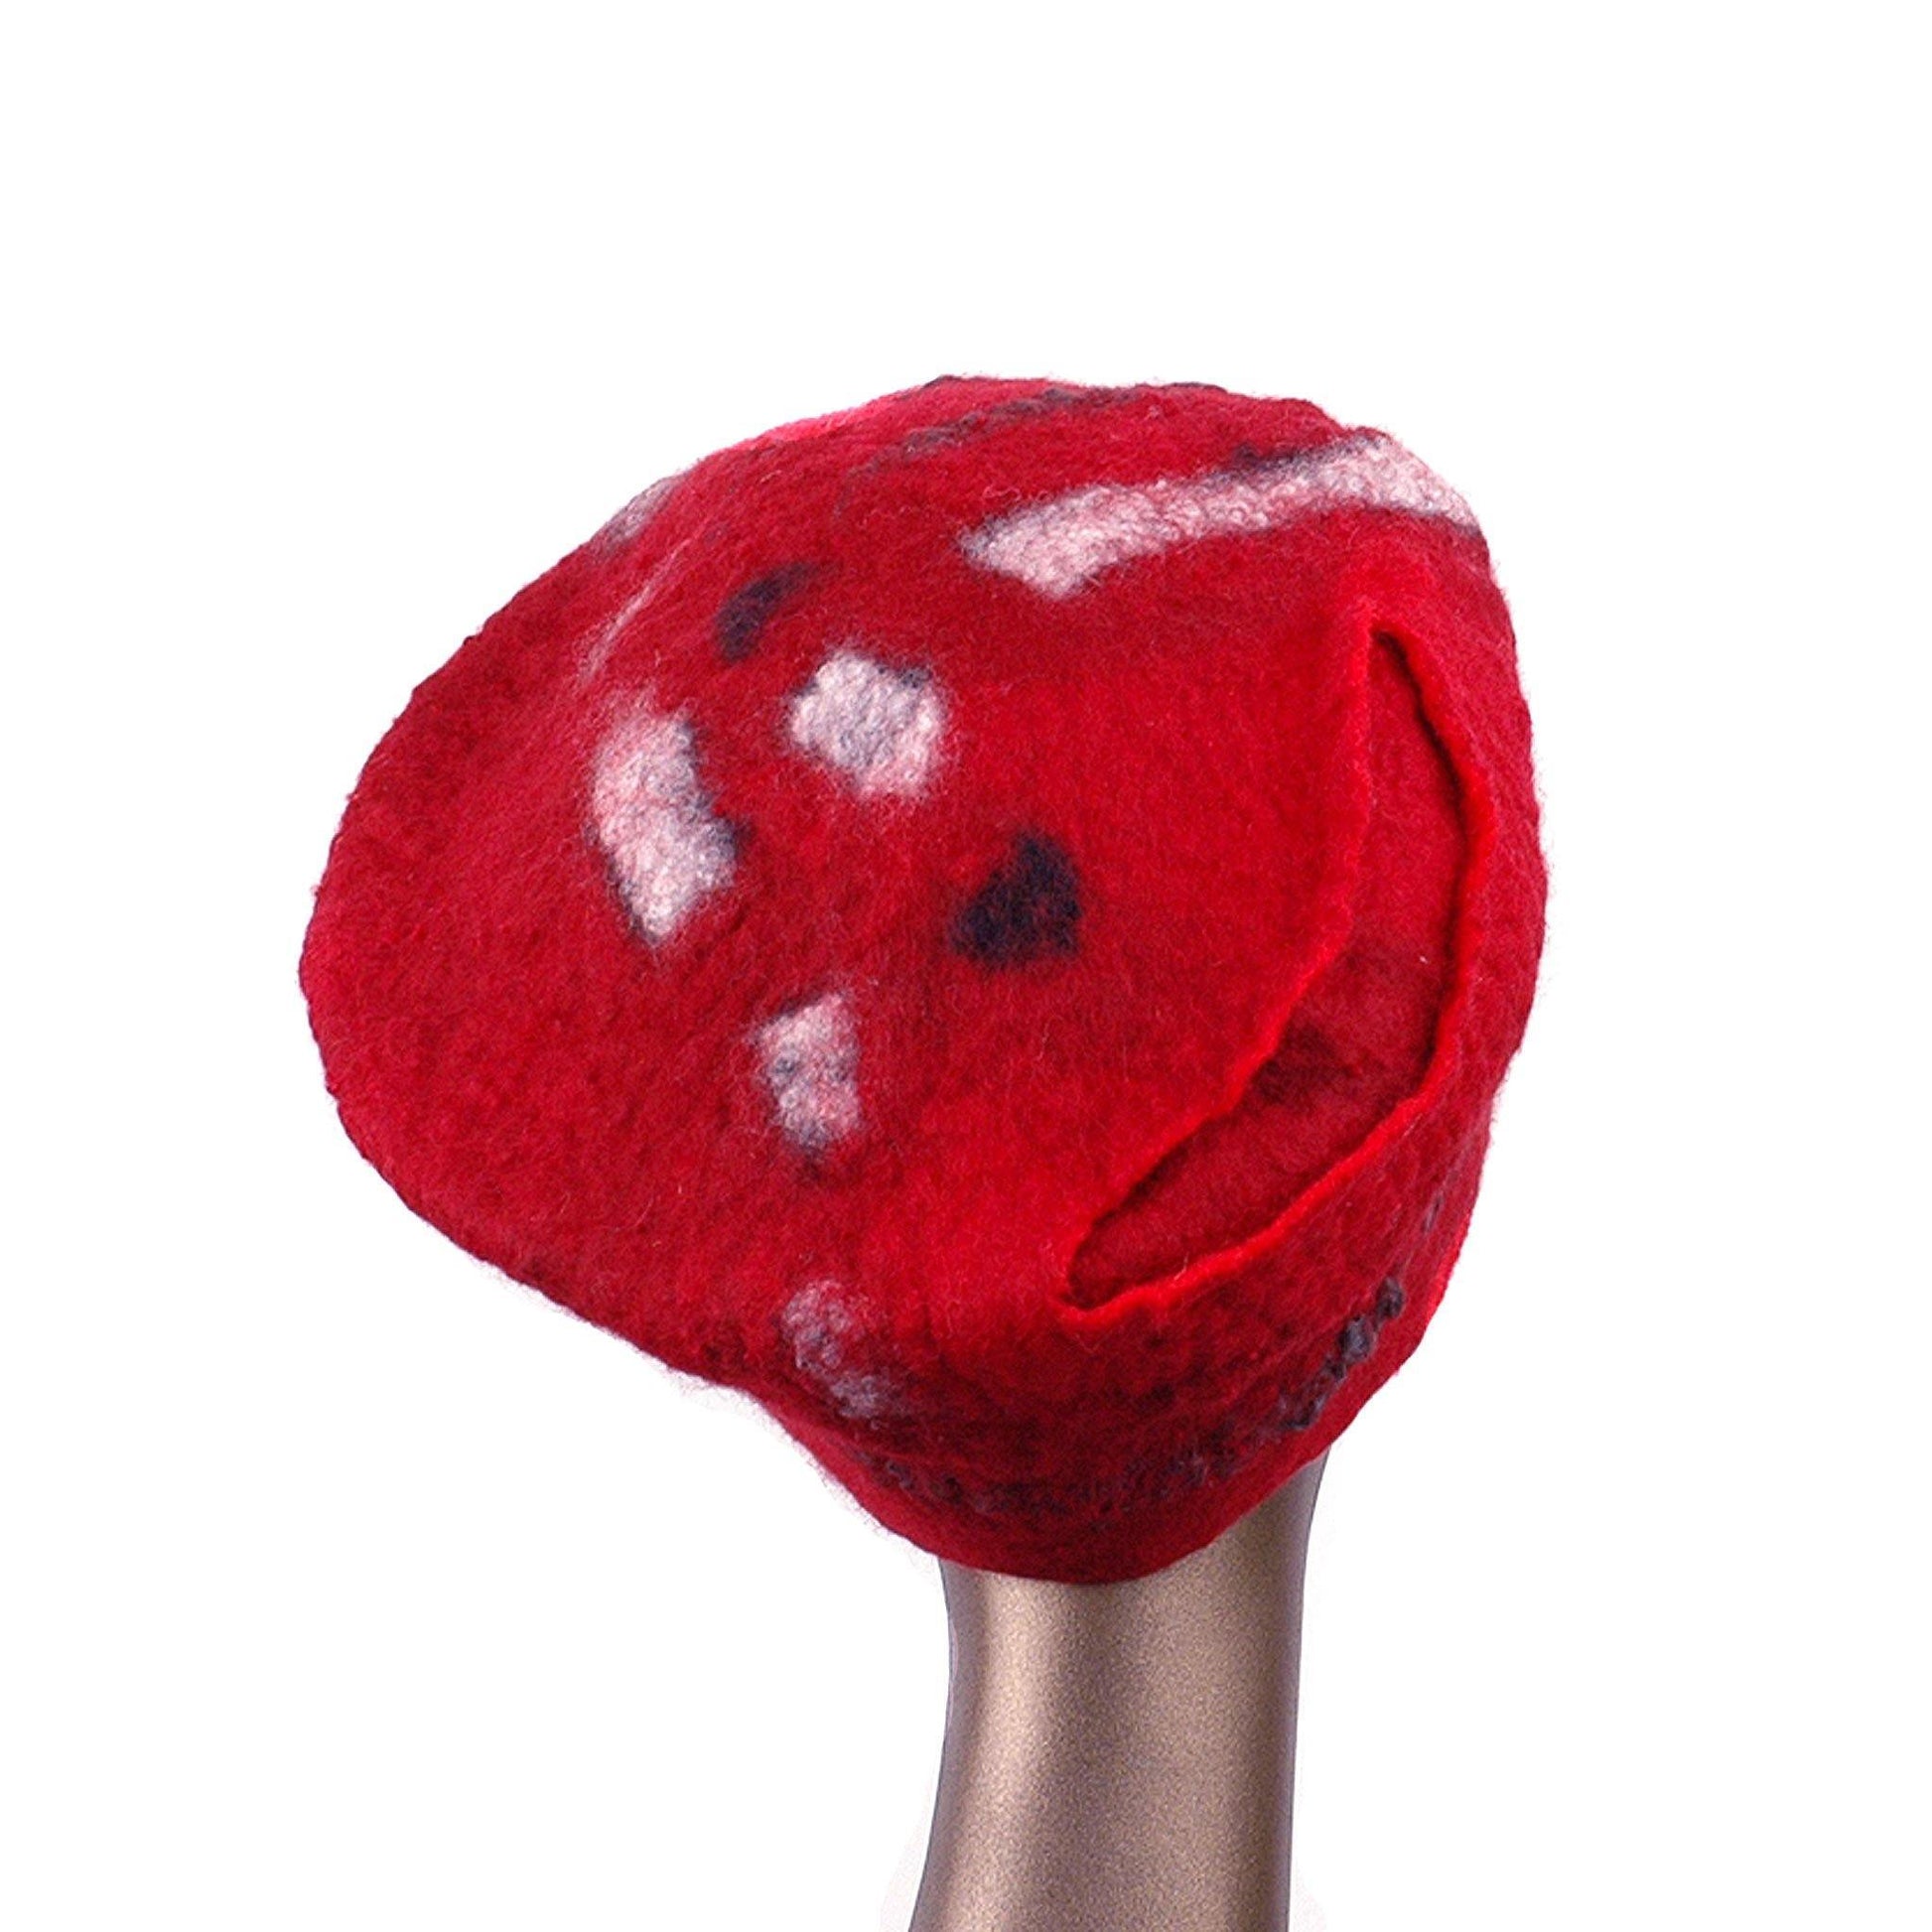 Russian Constructivist Inspired Red and Black Felted Beret - back view